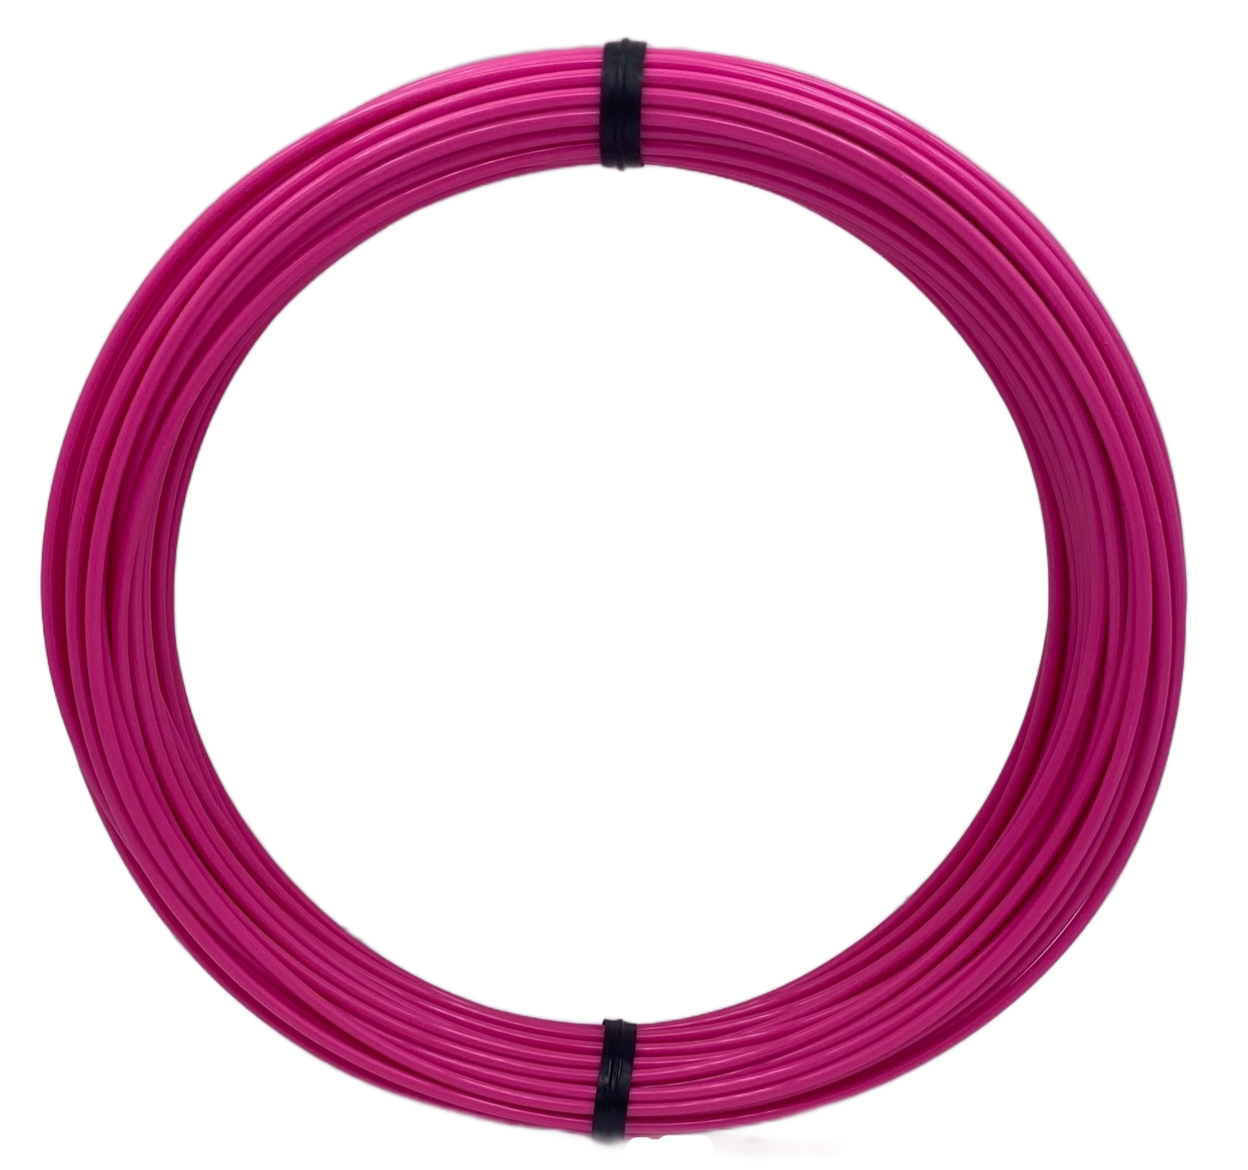 Sample Coil PETG - Hot Pink Opaque